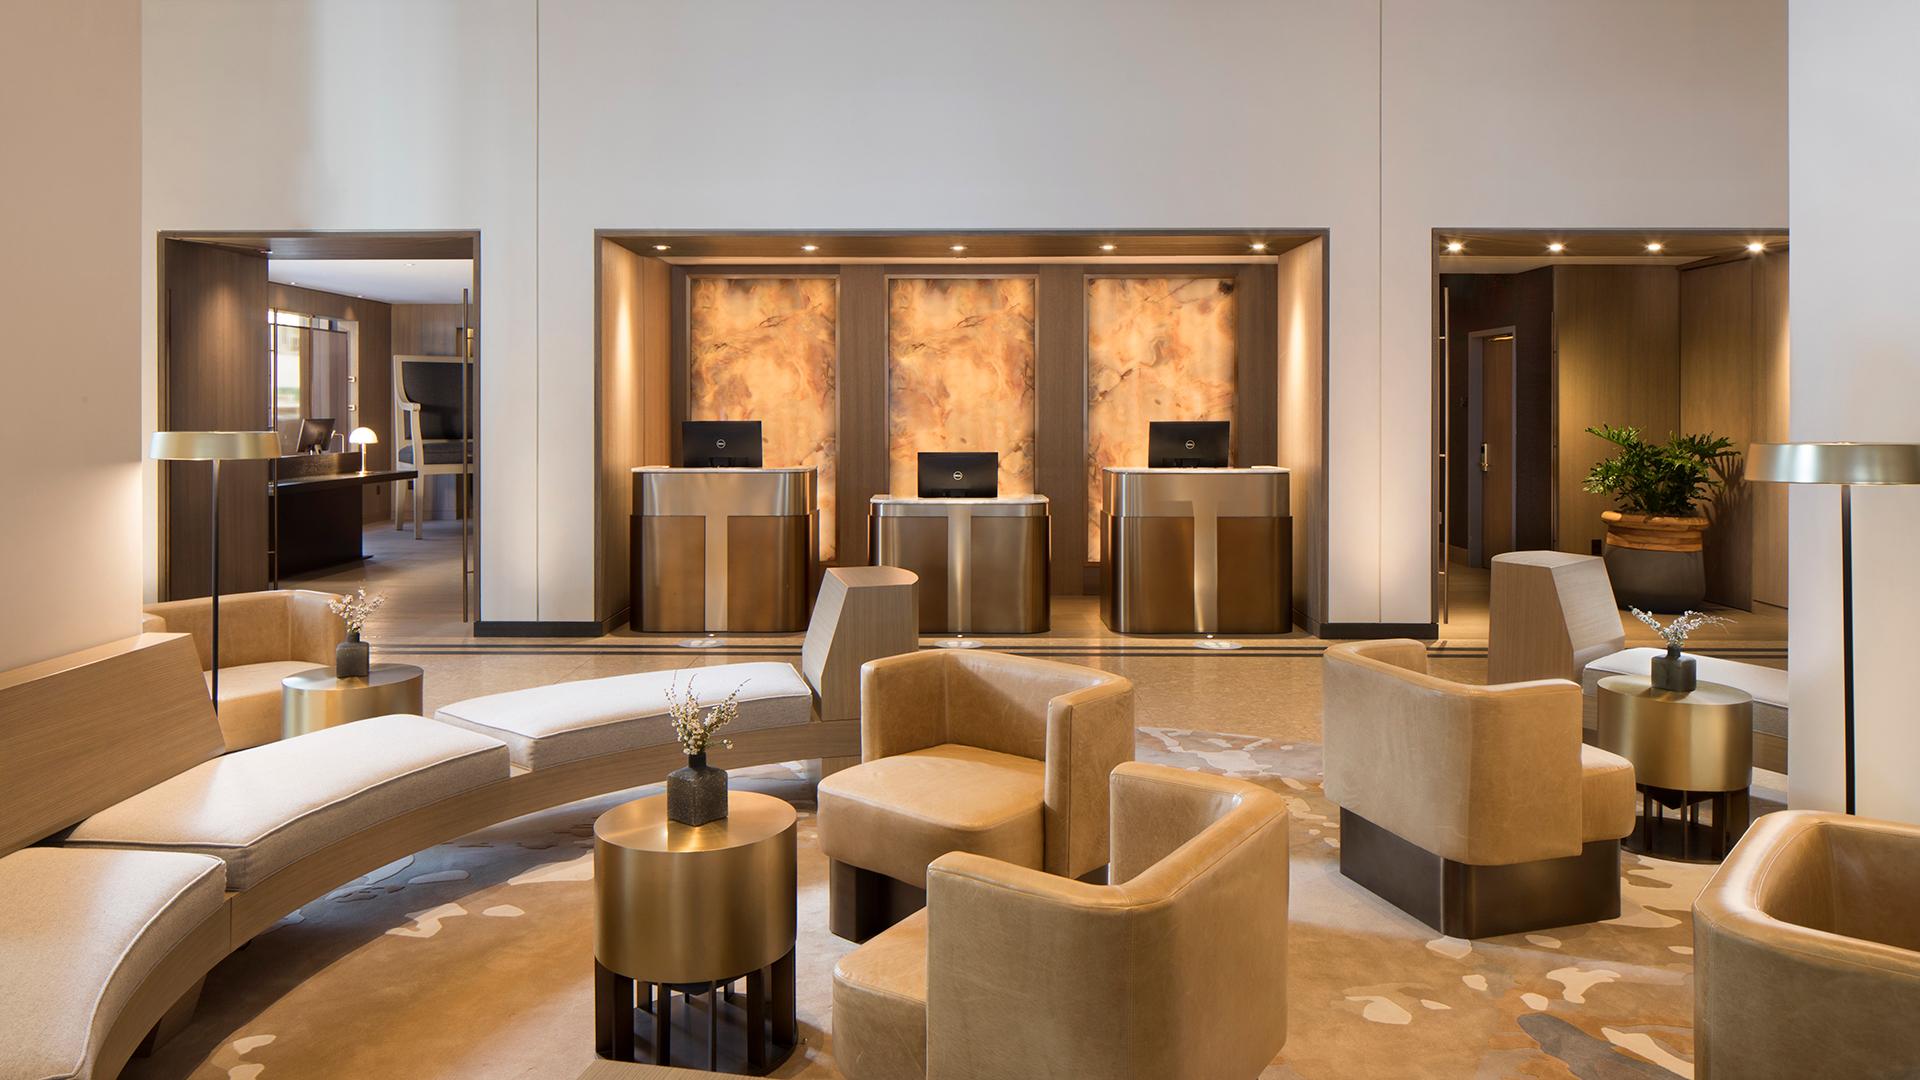 The Clift Royal Sonesta Hotel, San Fransisco | The lobby and check-in desks